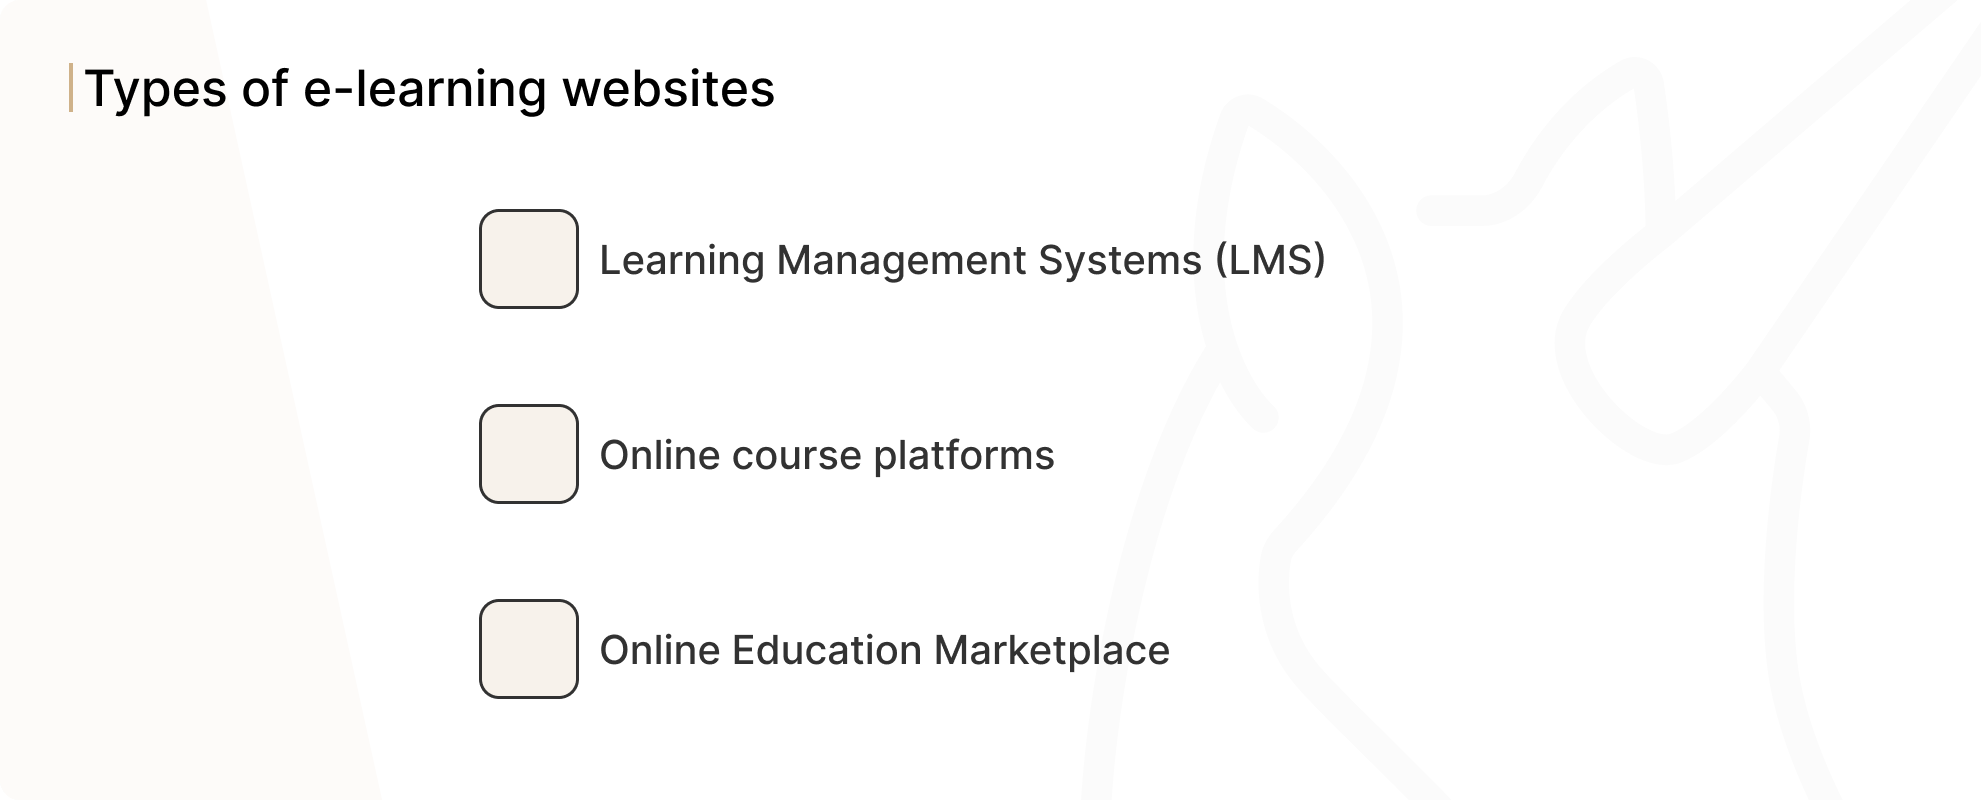 Types of e-learning websites